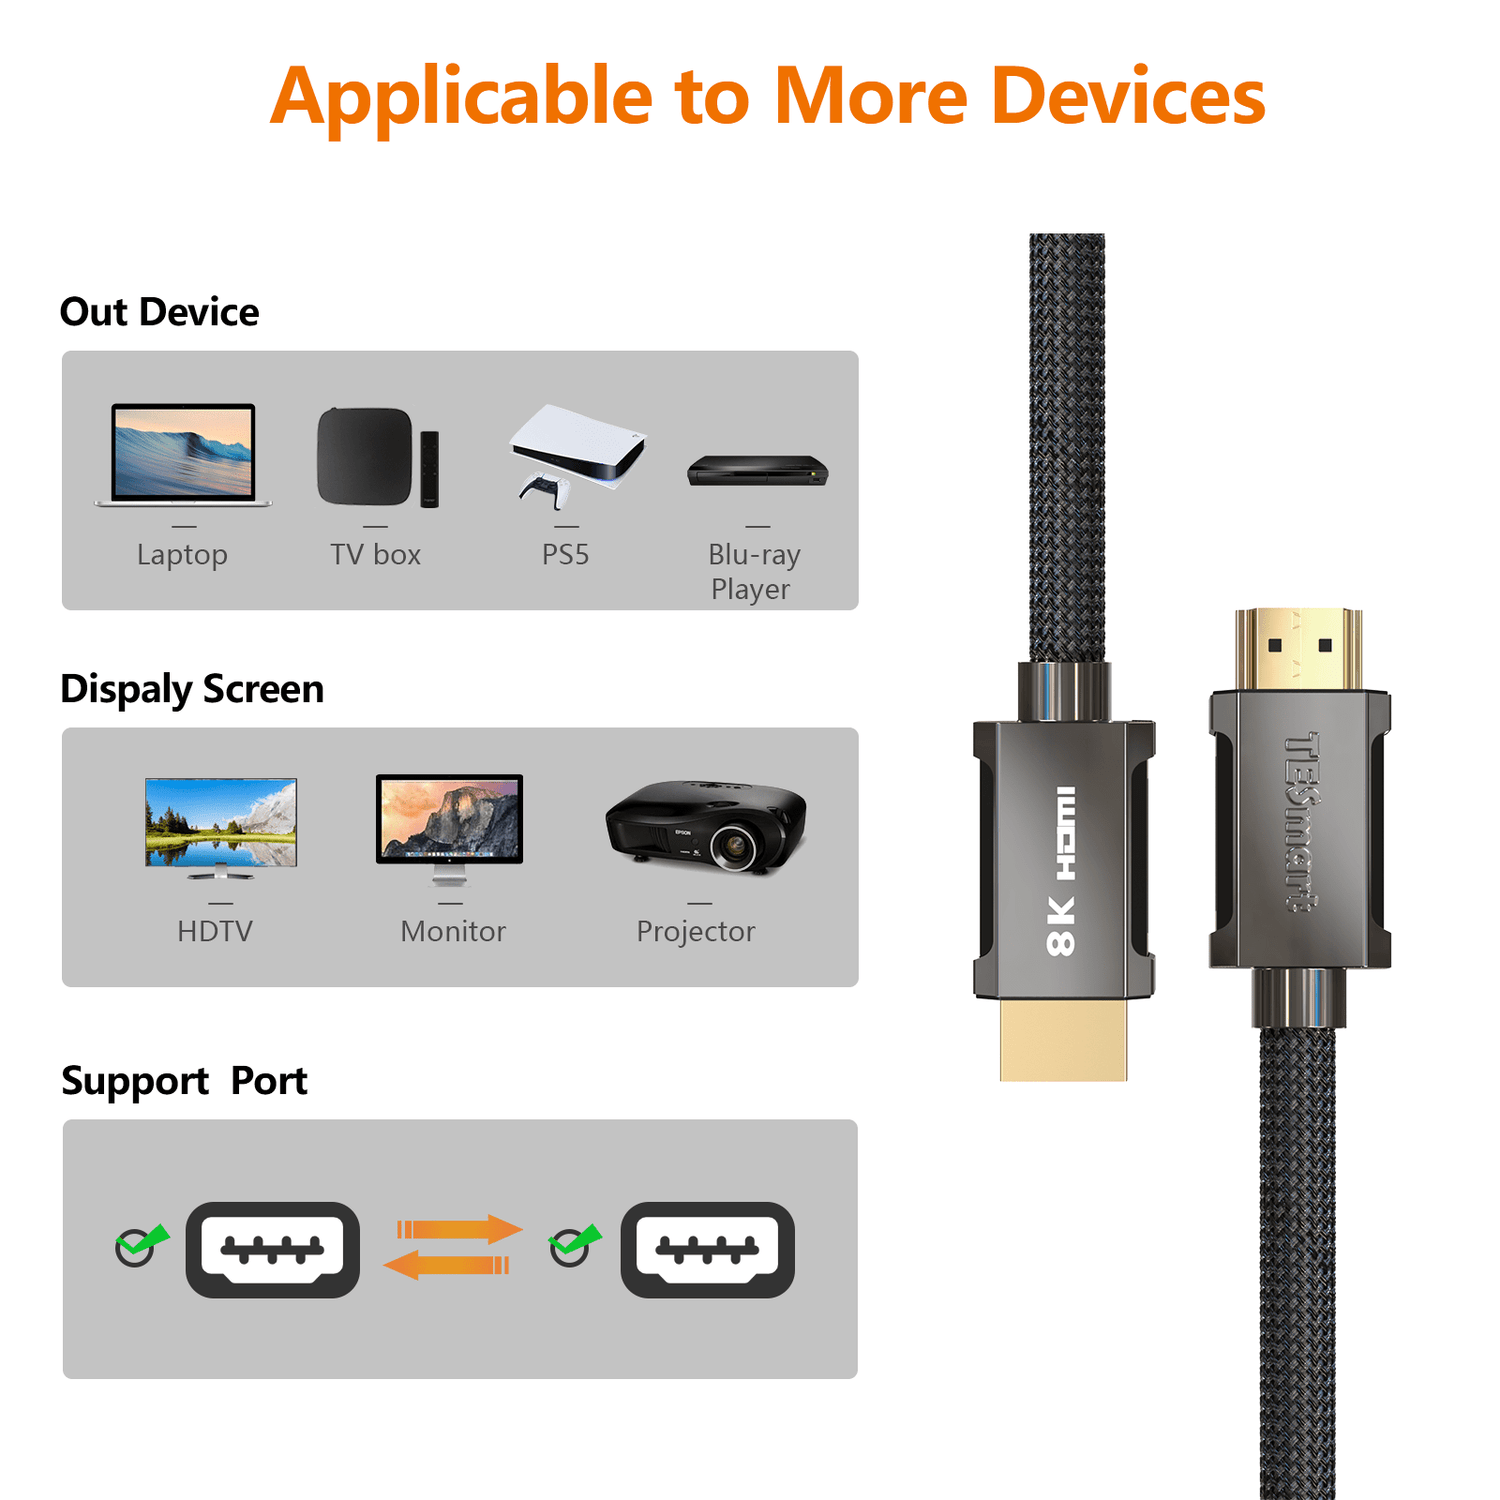 TESmart HD8K200 TESmart Accessoriess 8K HDMI 2.1 Cable 6.6ft, 48Gbps High-Speed ,Dynamic HDR, eARC, Dolby Vision 710185993348 HDMI 2.1 8K Cable Supports HDR, Dolby Vision, 3D, ARC -TESmart 2m